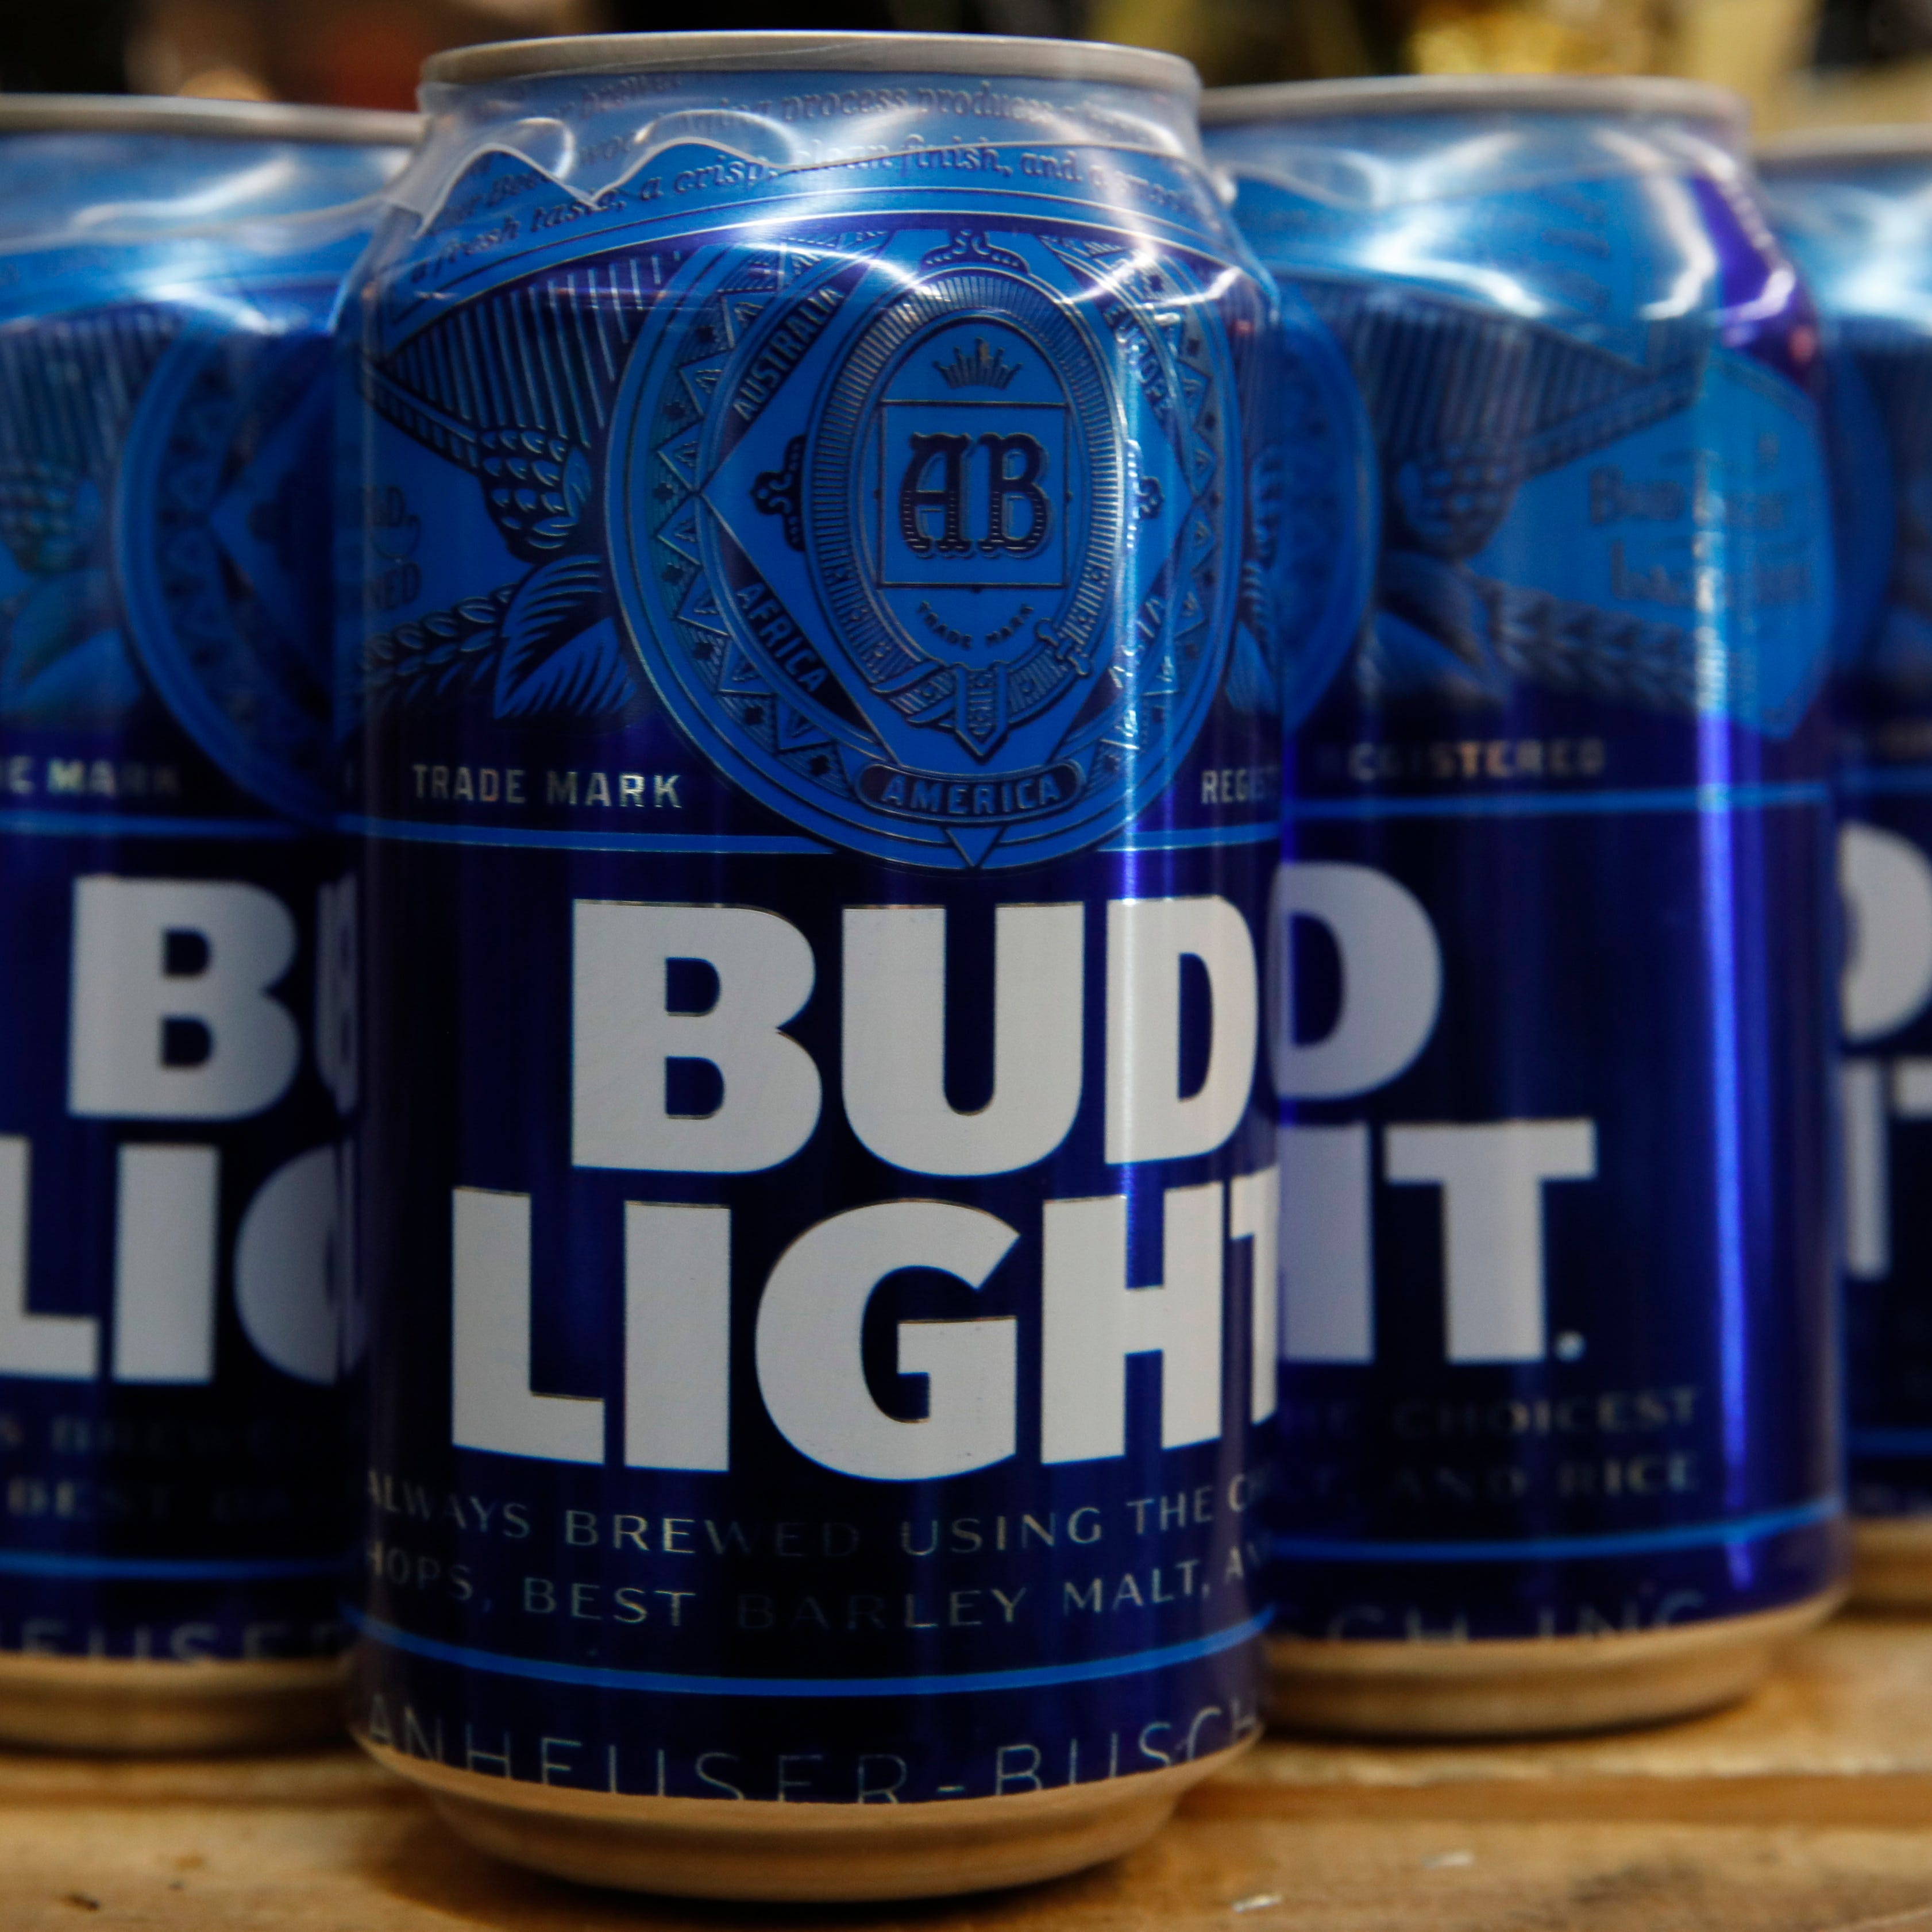 Cans of Bud Light beer are seen, Thursday Jan. 10, 2019, in Washington.